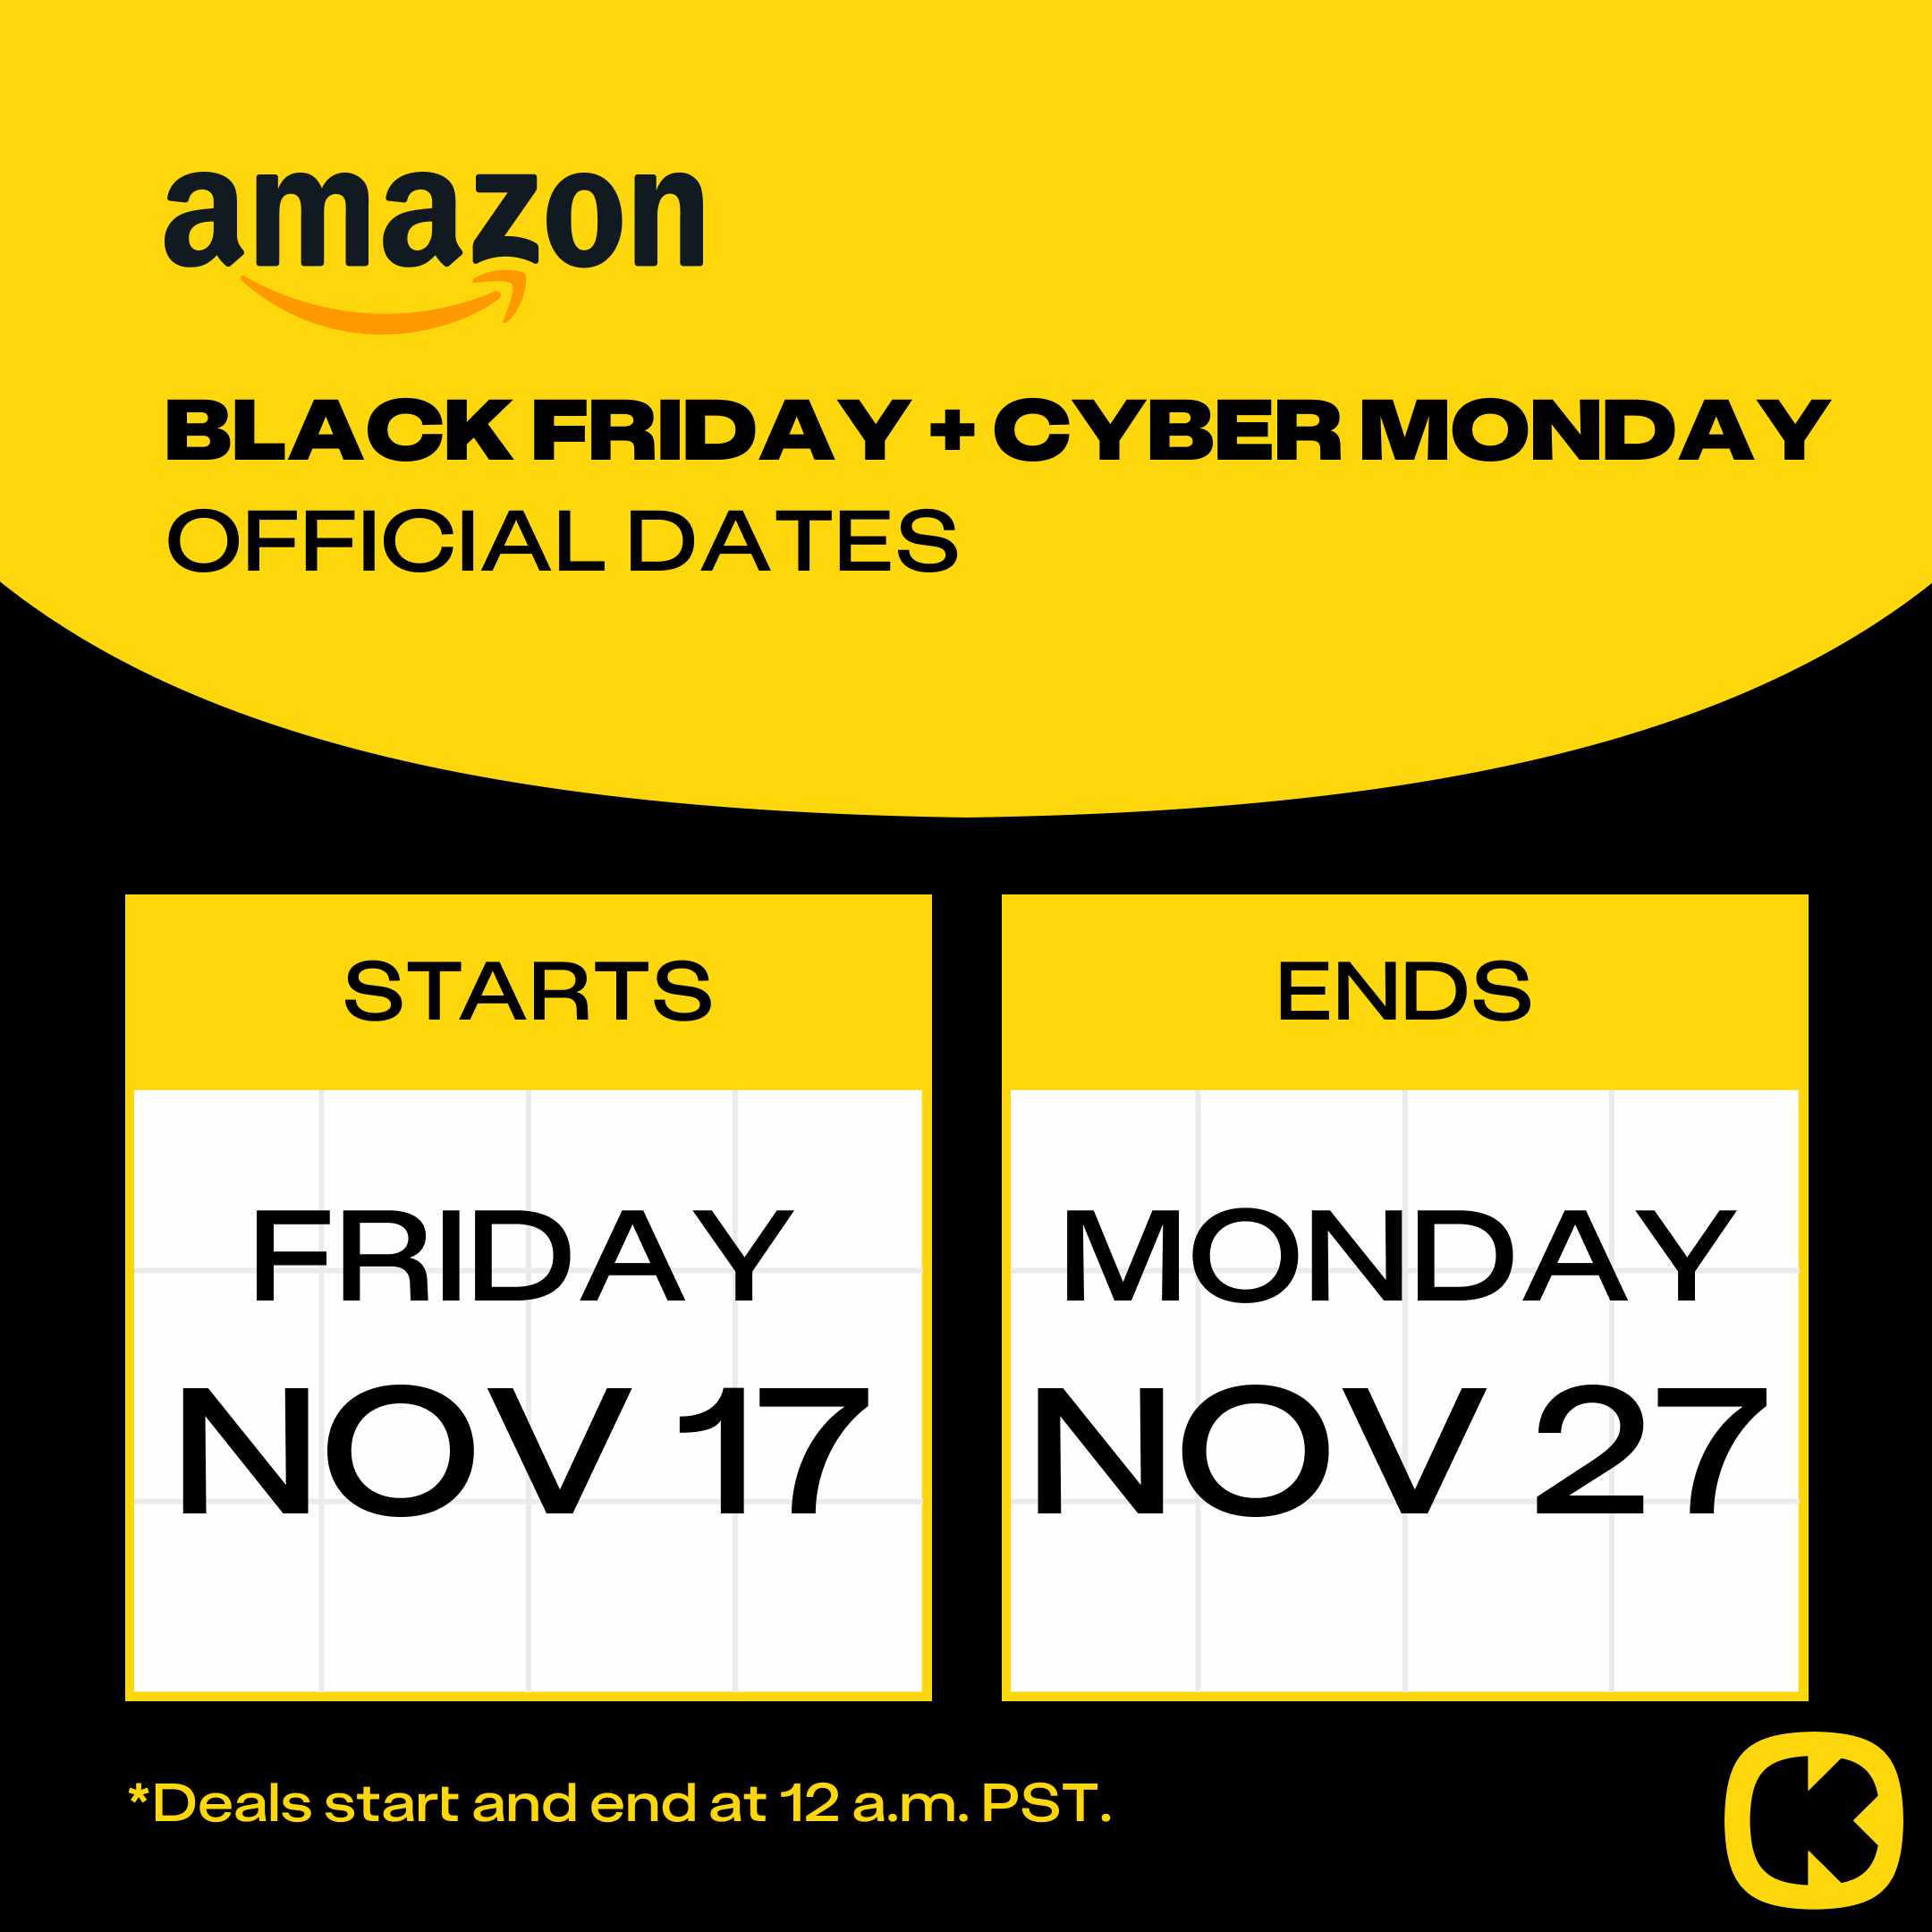 https://prod-cdn-thekrazycouponlady.imgix.net/wp-content/uploads/2017/10/amazon-black-friday-graphic-edit-1699277789-1699277789.png?auto=format&fit=fill&q=25